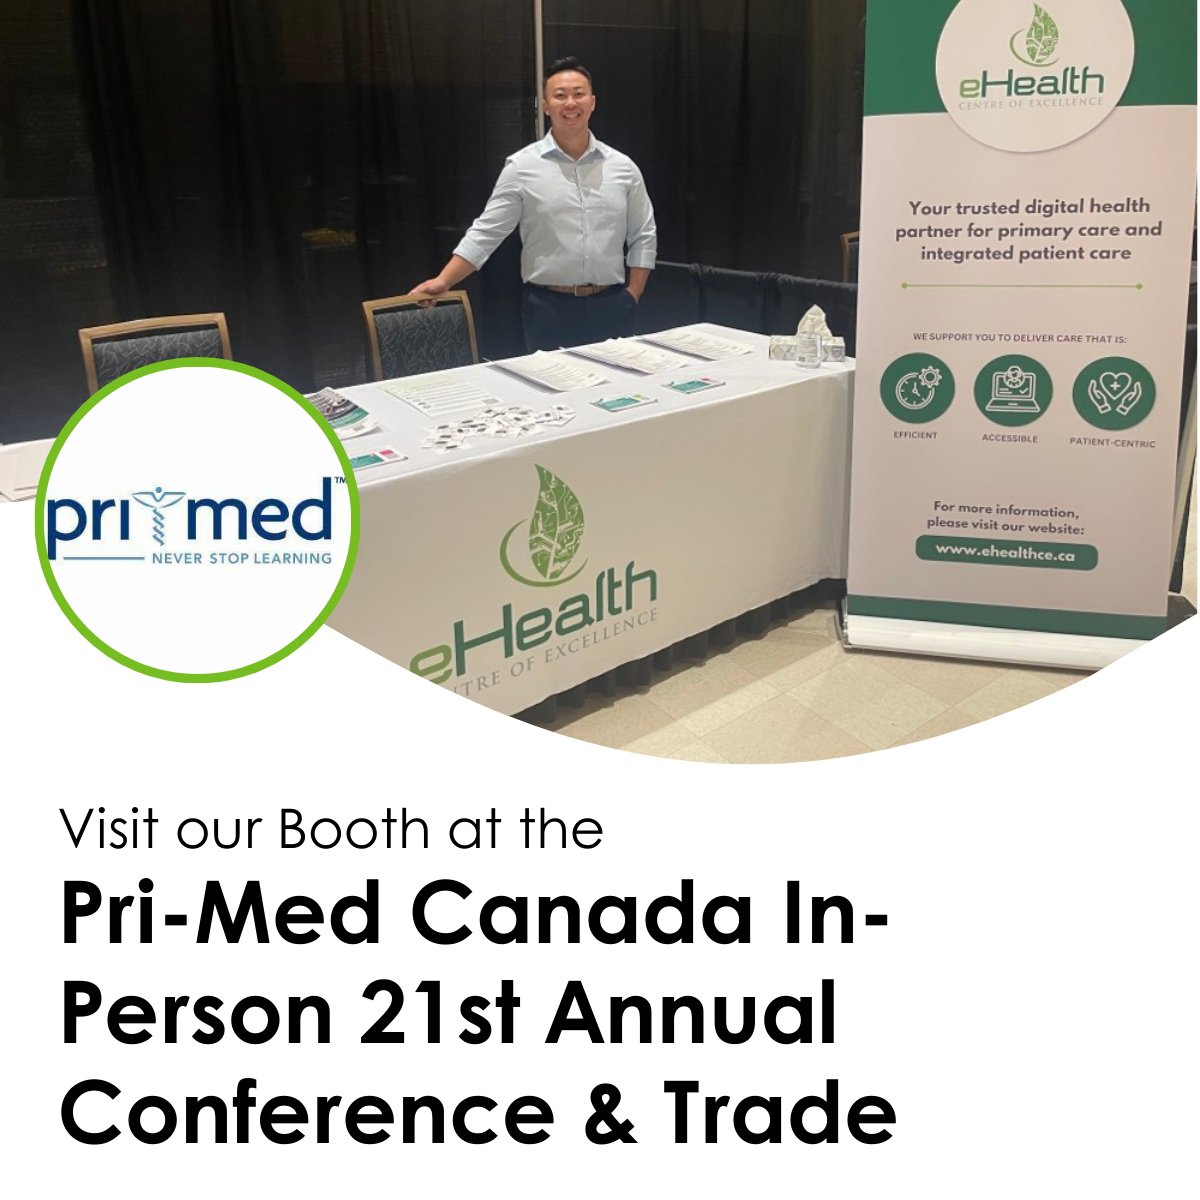 Attending Pri-Med this week? Be sure to stop by our booth to learn about the digital health tools and services available for primary care! #digitalhealth #primarycare #primed #conference